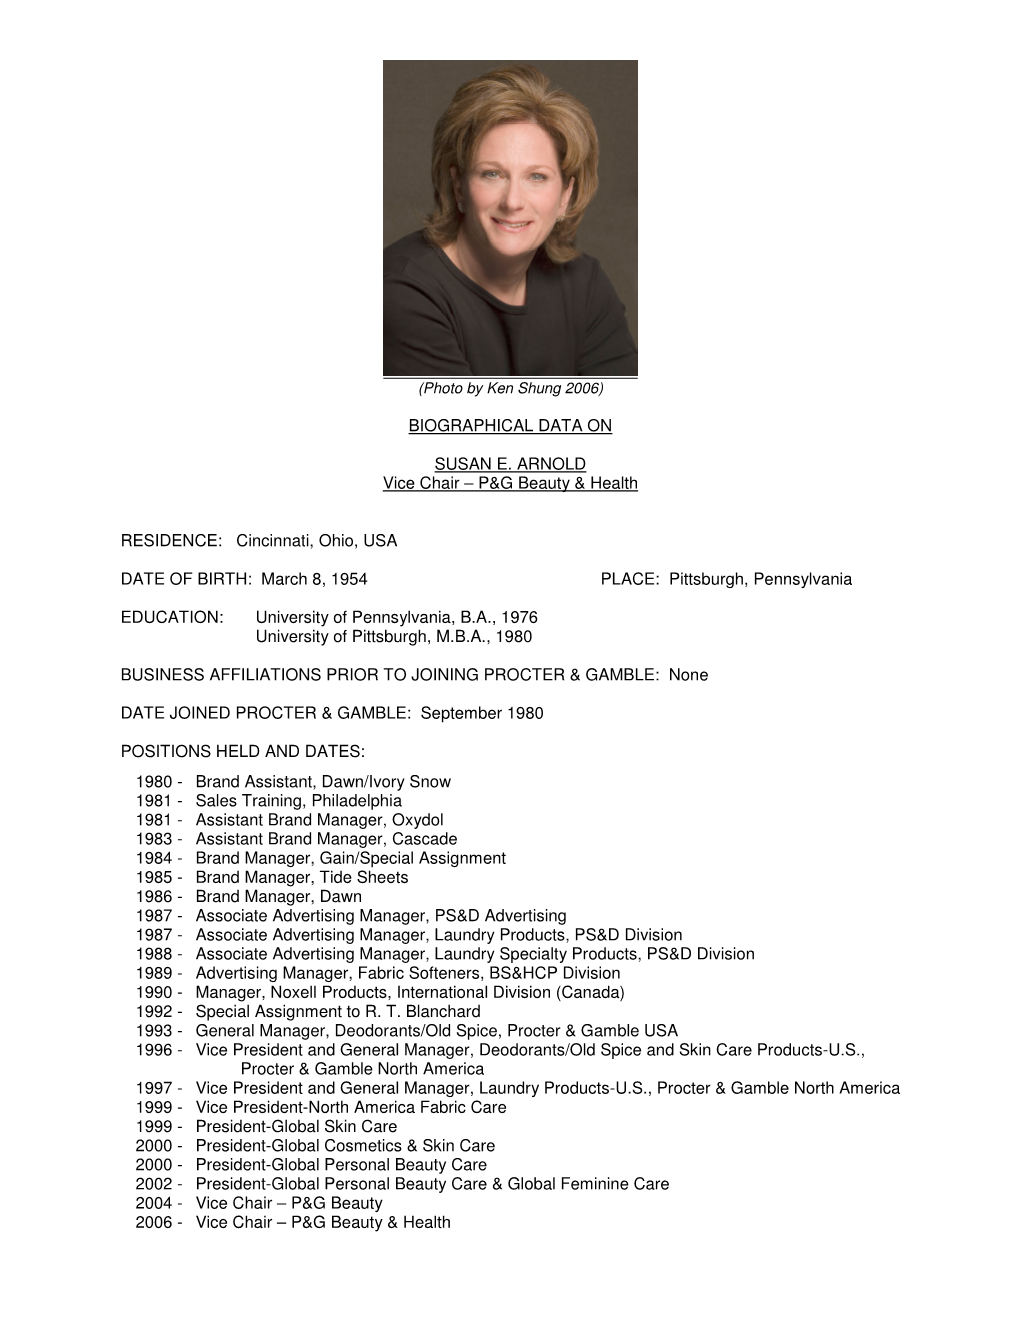 BIOGRAPHICAL DATA on SUSAN E. ARNOLD Vice Chair